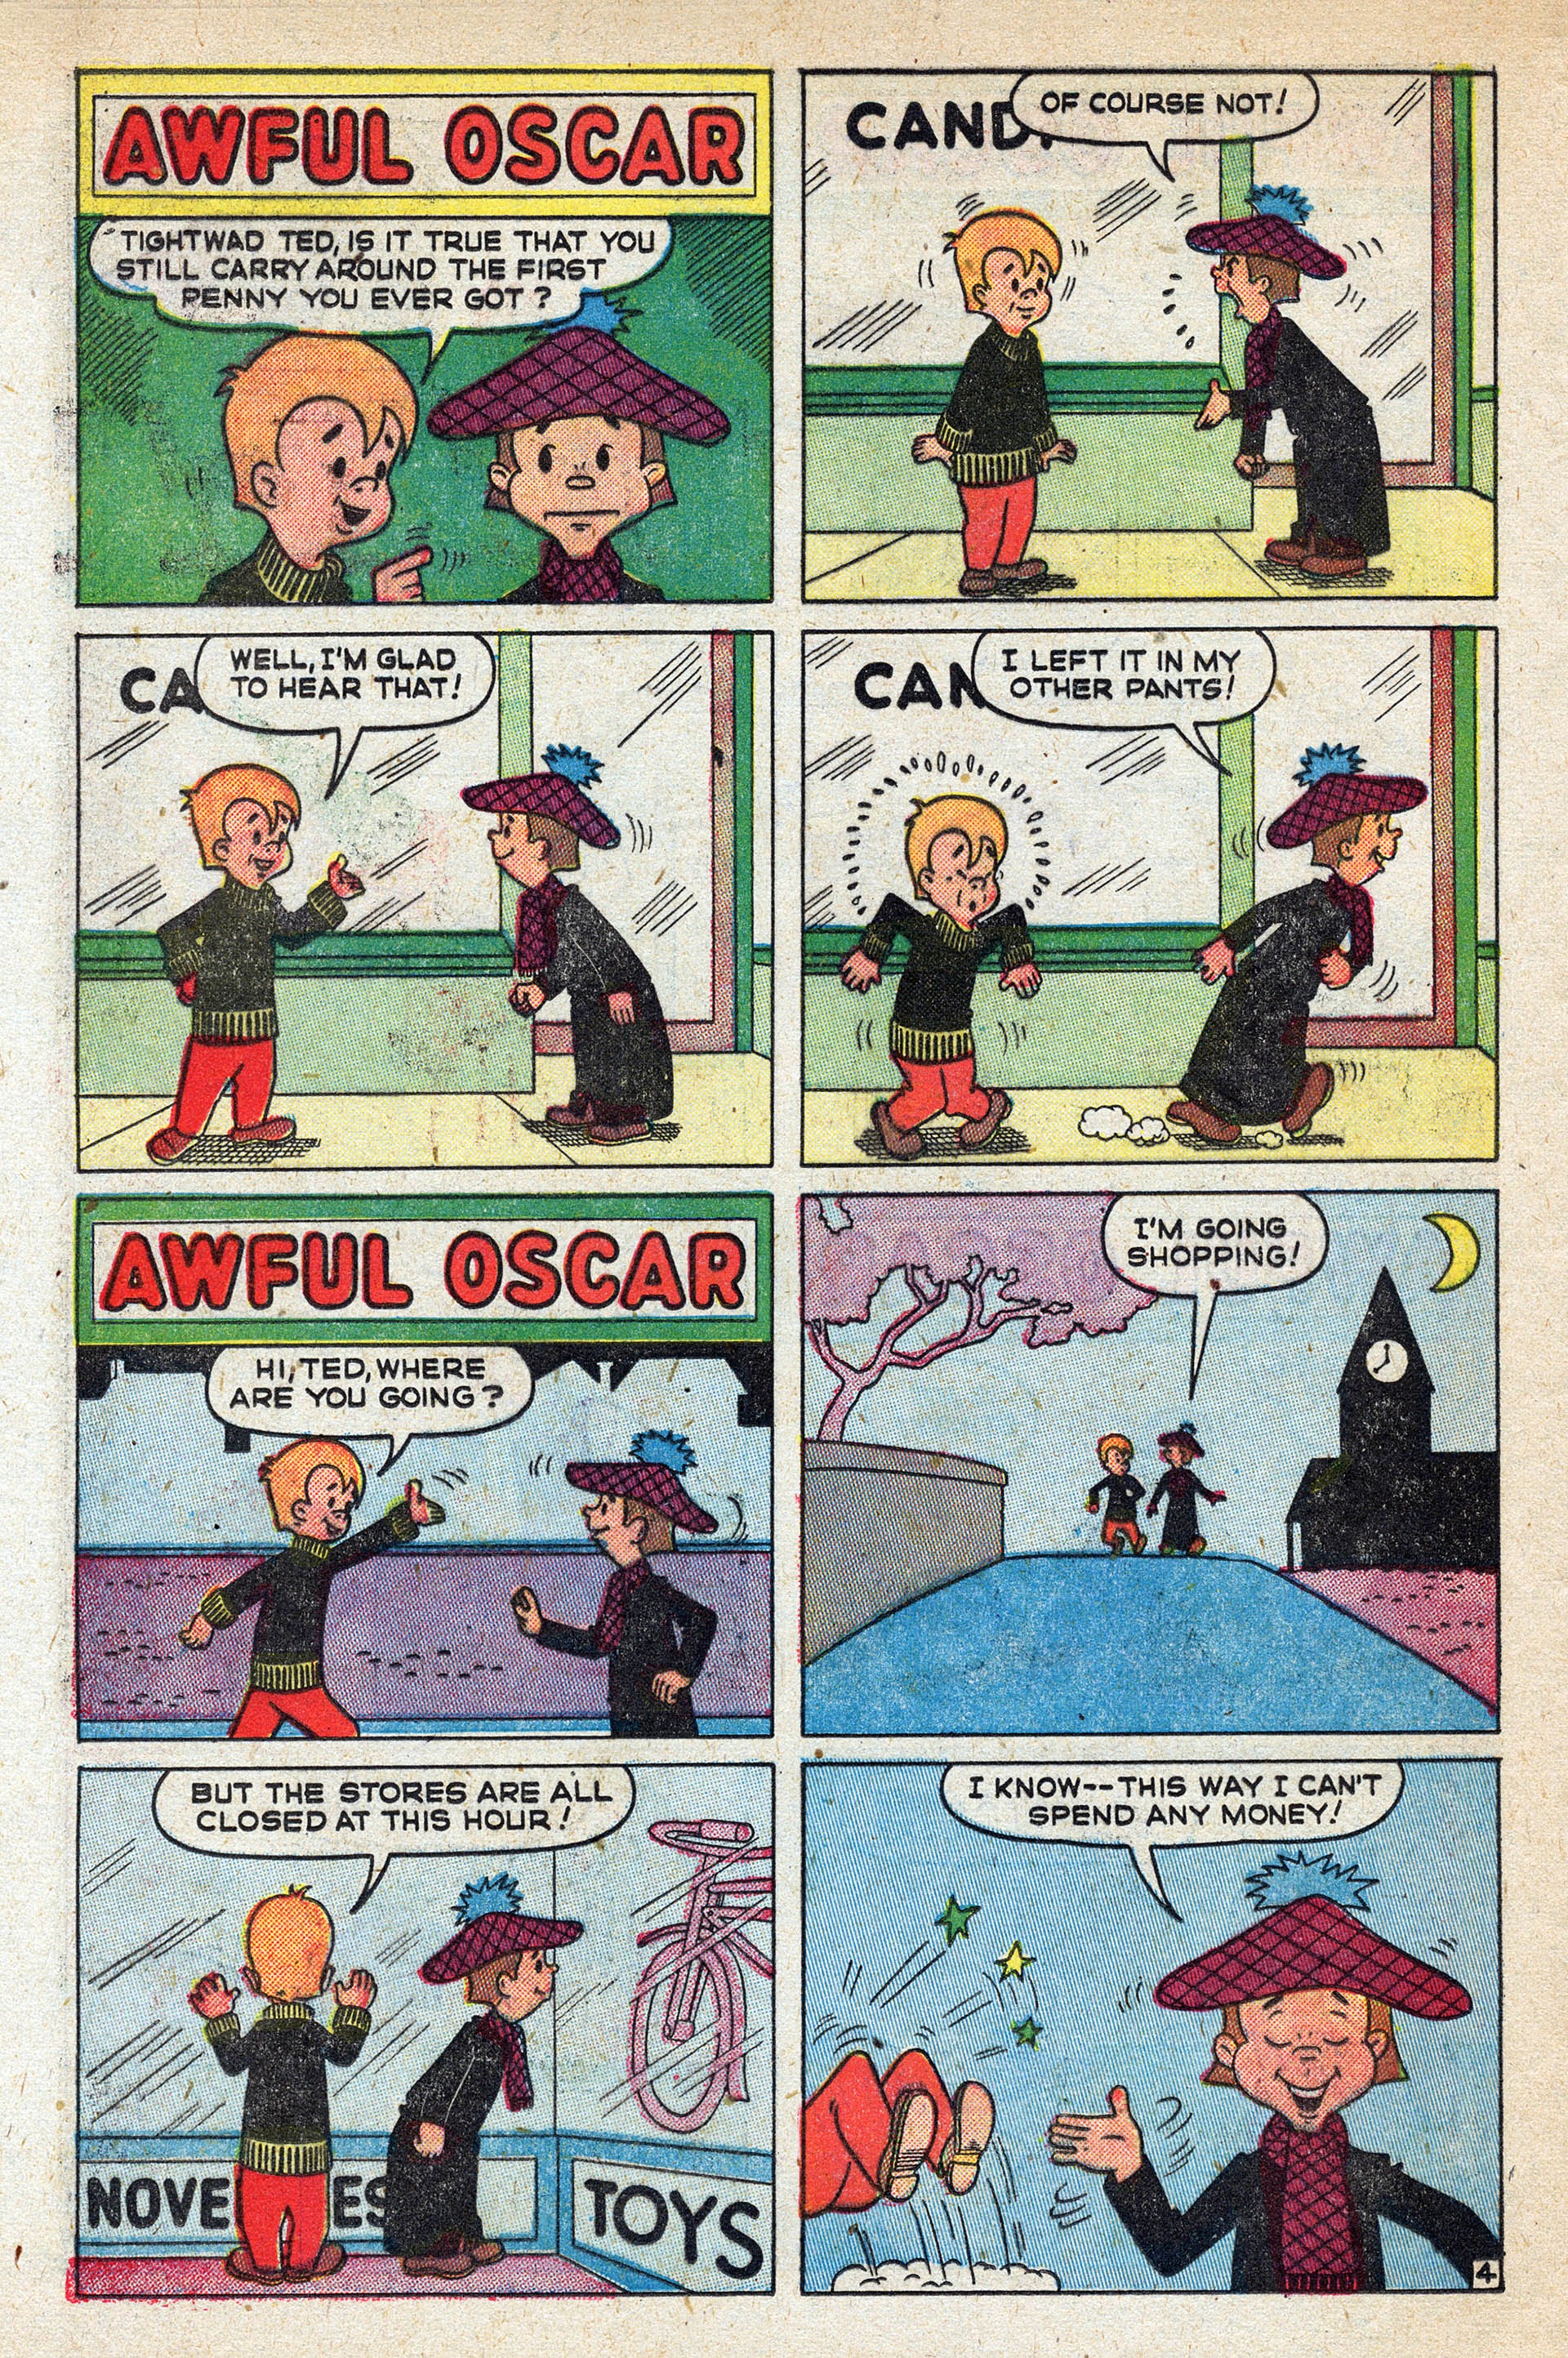 Read online Awful Oscar comic -  Issue #11 - 24